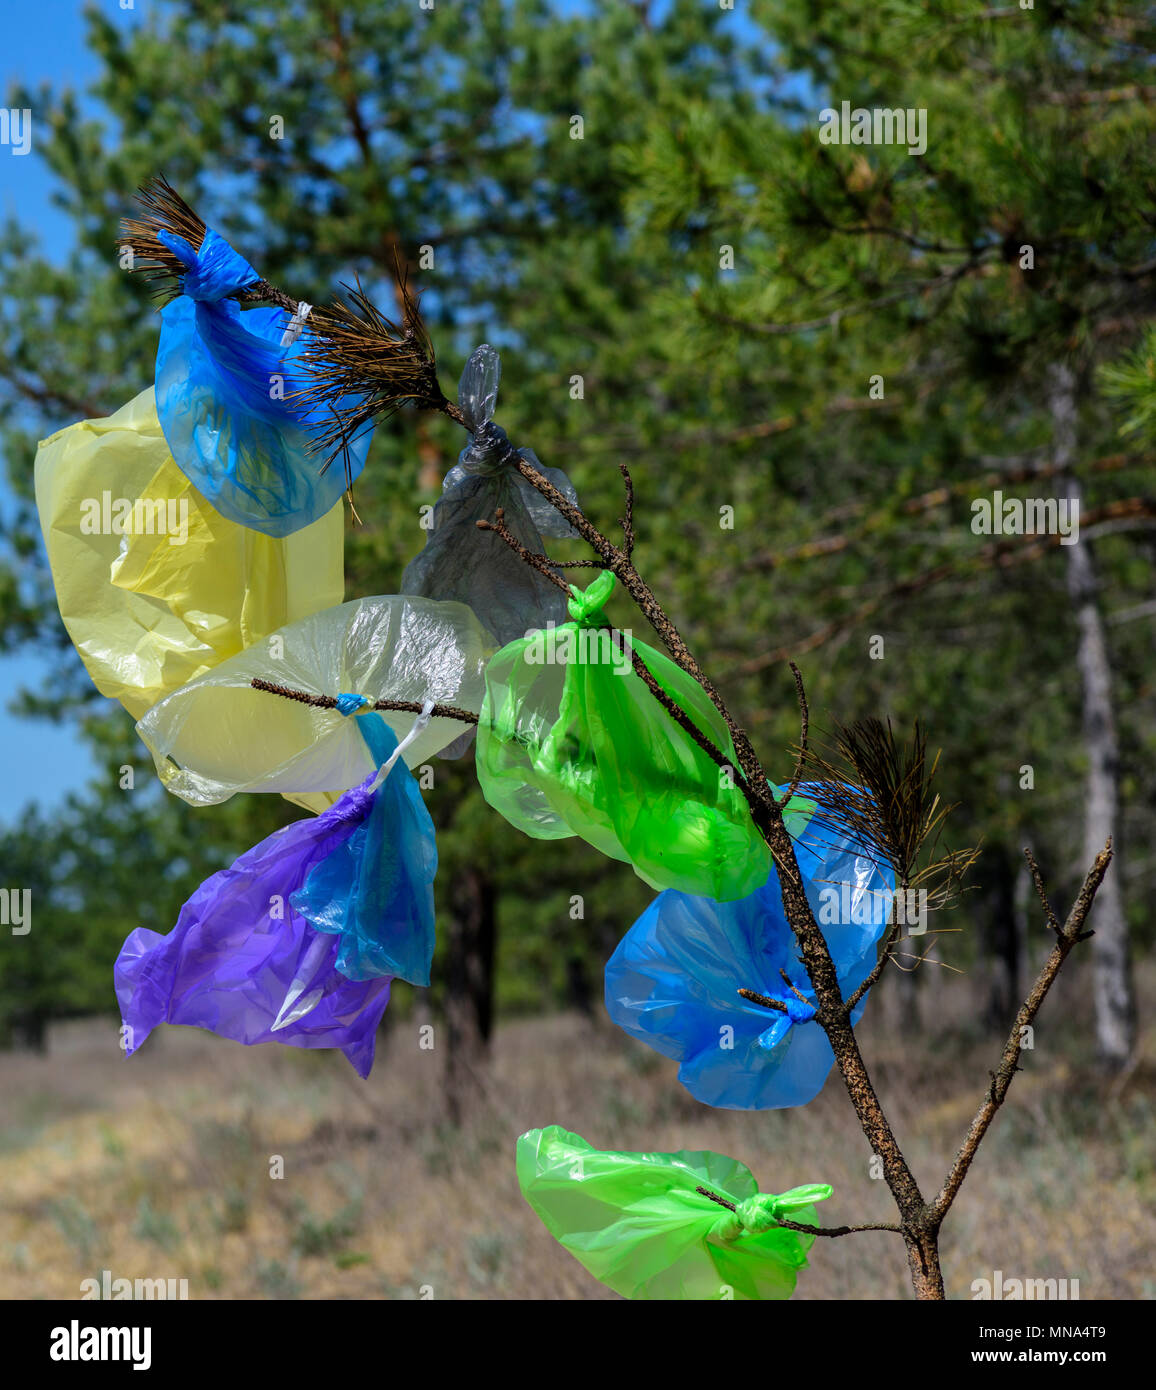 https://c8.alamy.com/comp/MNA4T9/many-multicolored-plastic-bags-hanging-on-a-pine-branch-against-a-background-of-green-forest-on-a-summer-day-the-concept-of-pollution-of-the-environm-MNA4T9.jpg